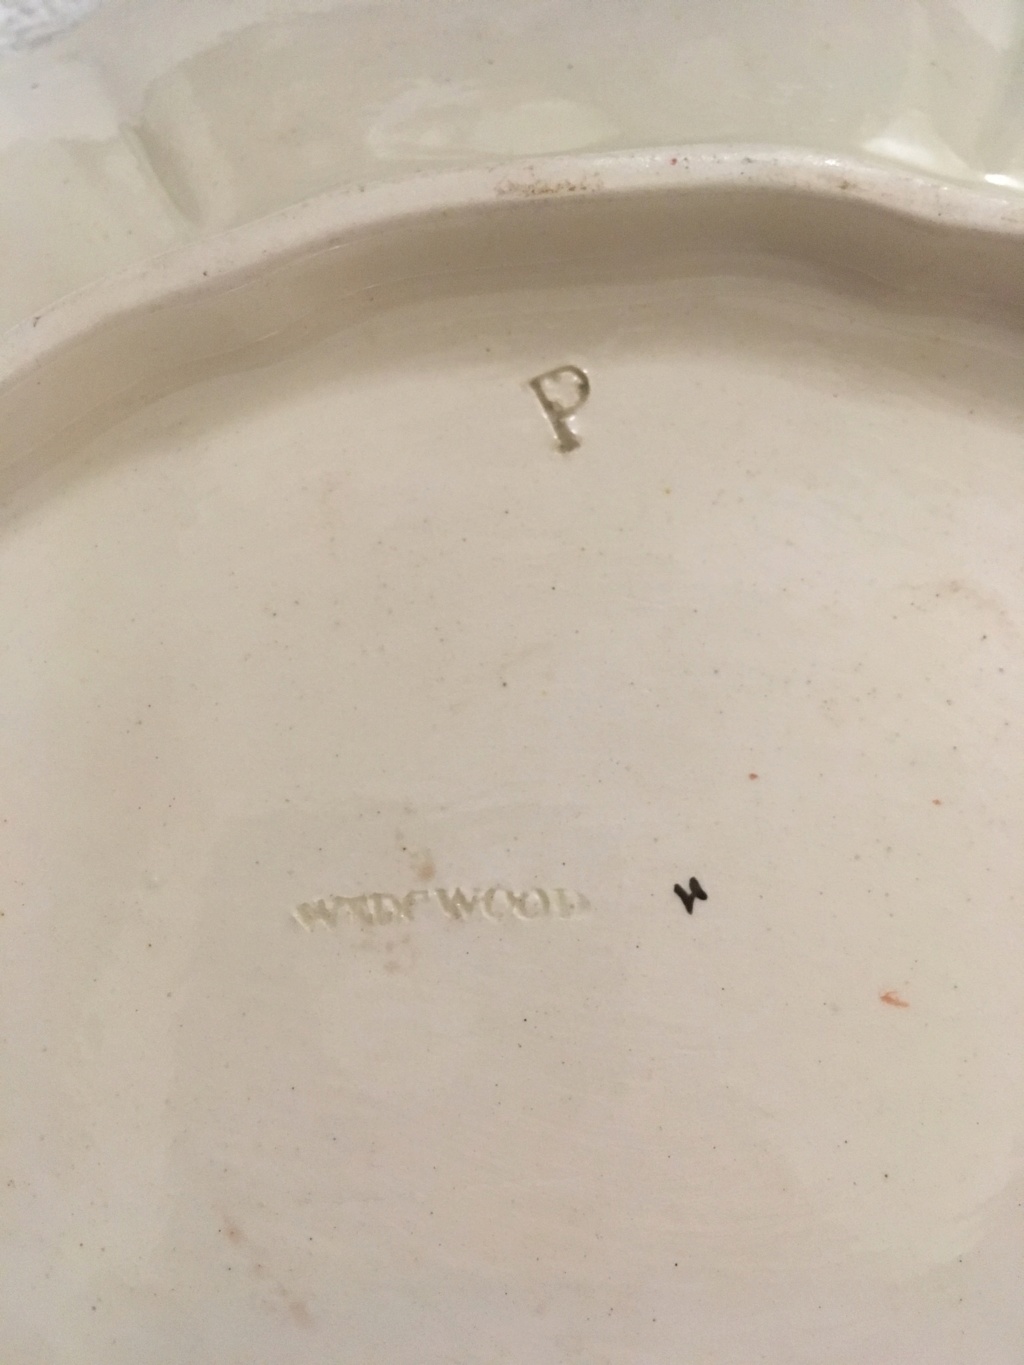 Help dating an early piece of Wedgwood? 84ceeb10